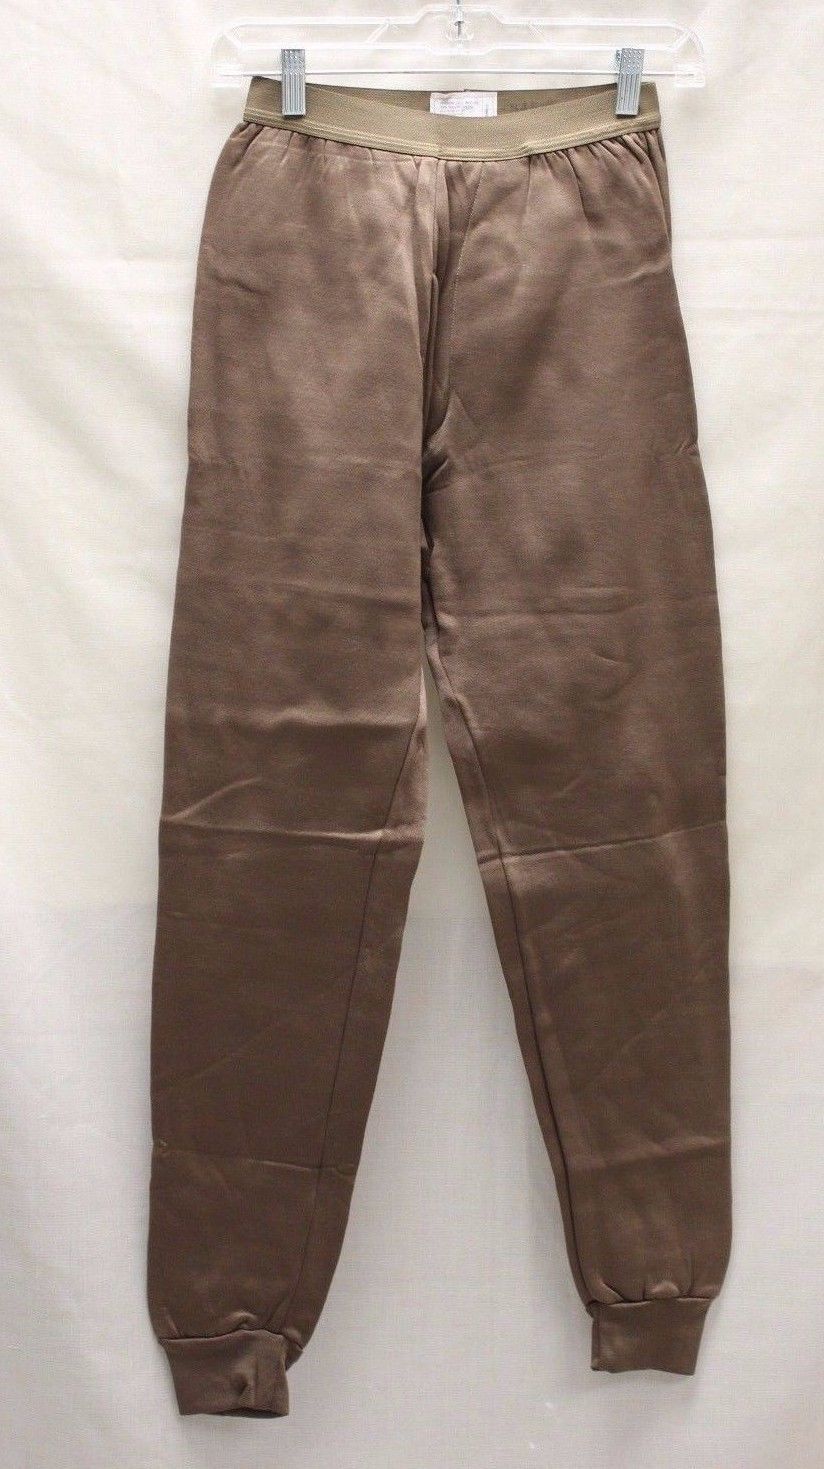 Cold Weather Polypropylene Drawers Long John Pants - Small - Used